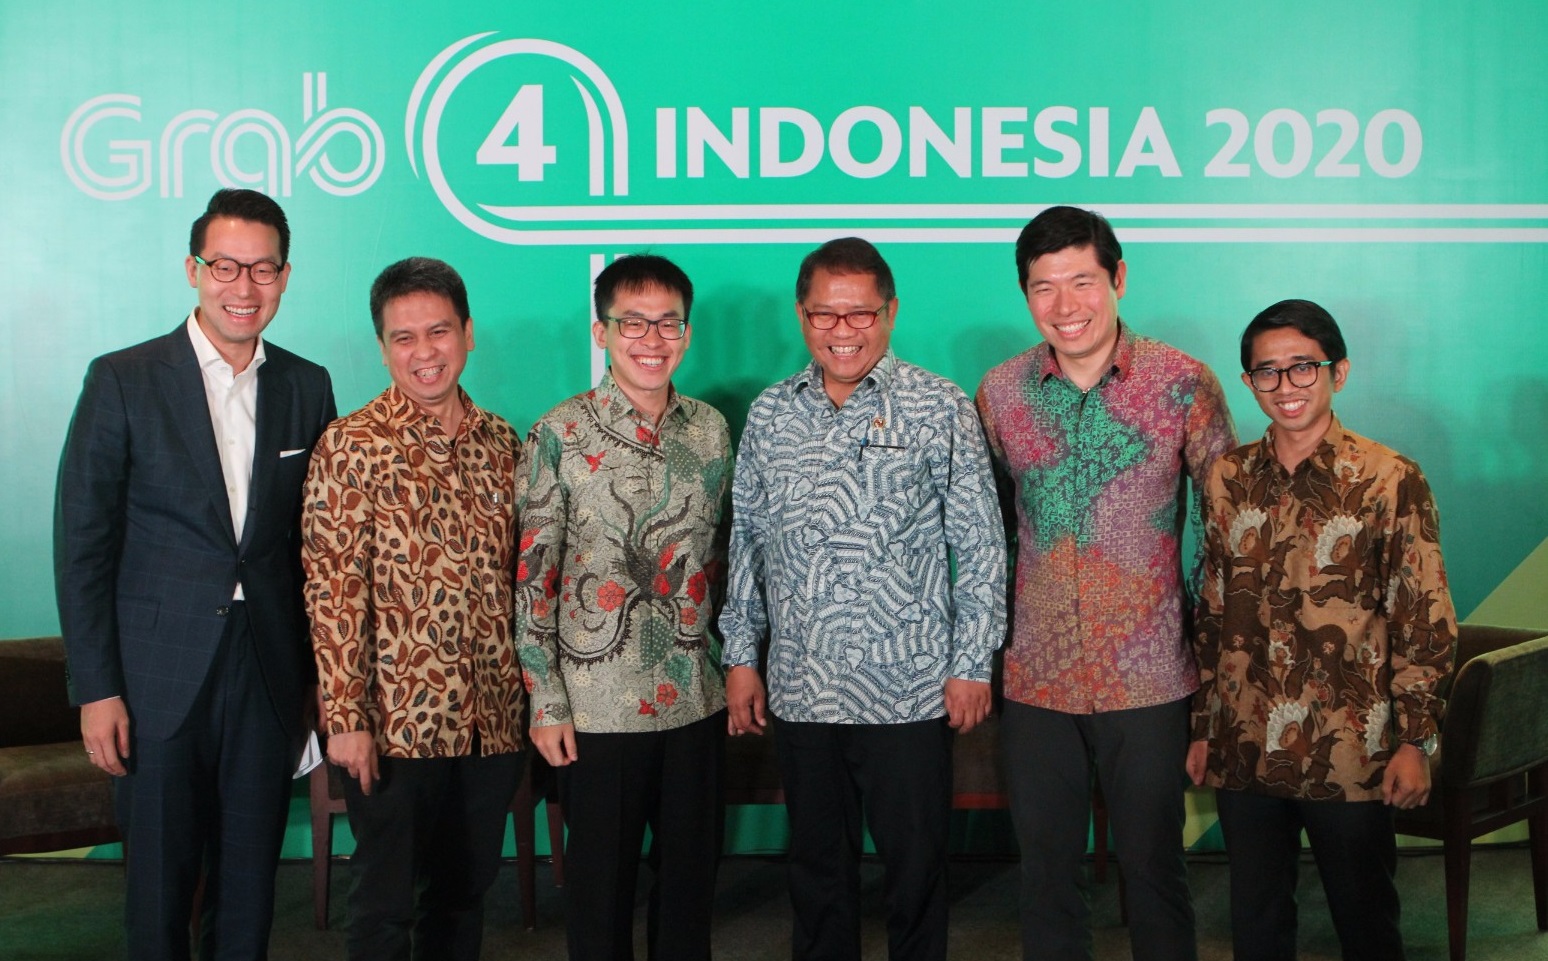 Grab to create 5 million micro-entrepreneurs in Indonesia by 2018